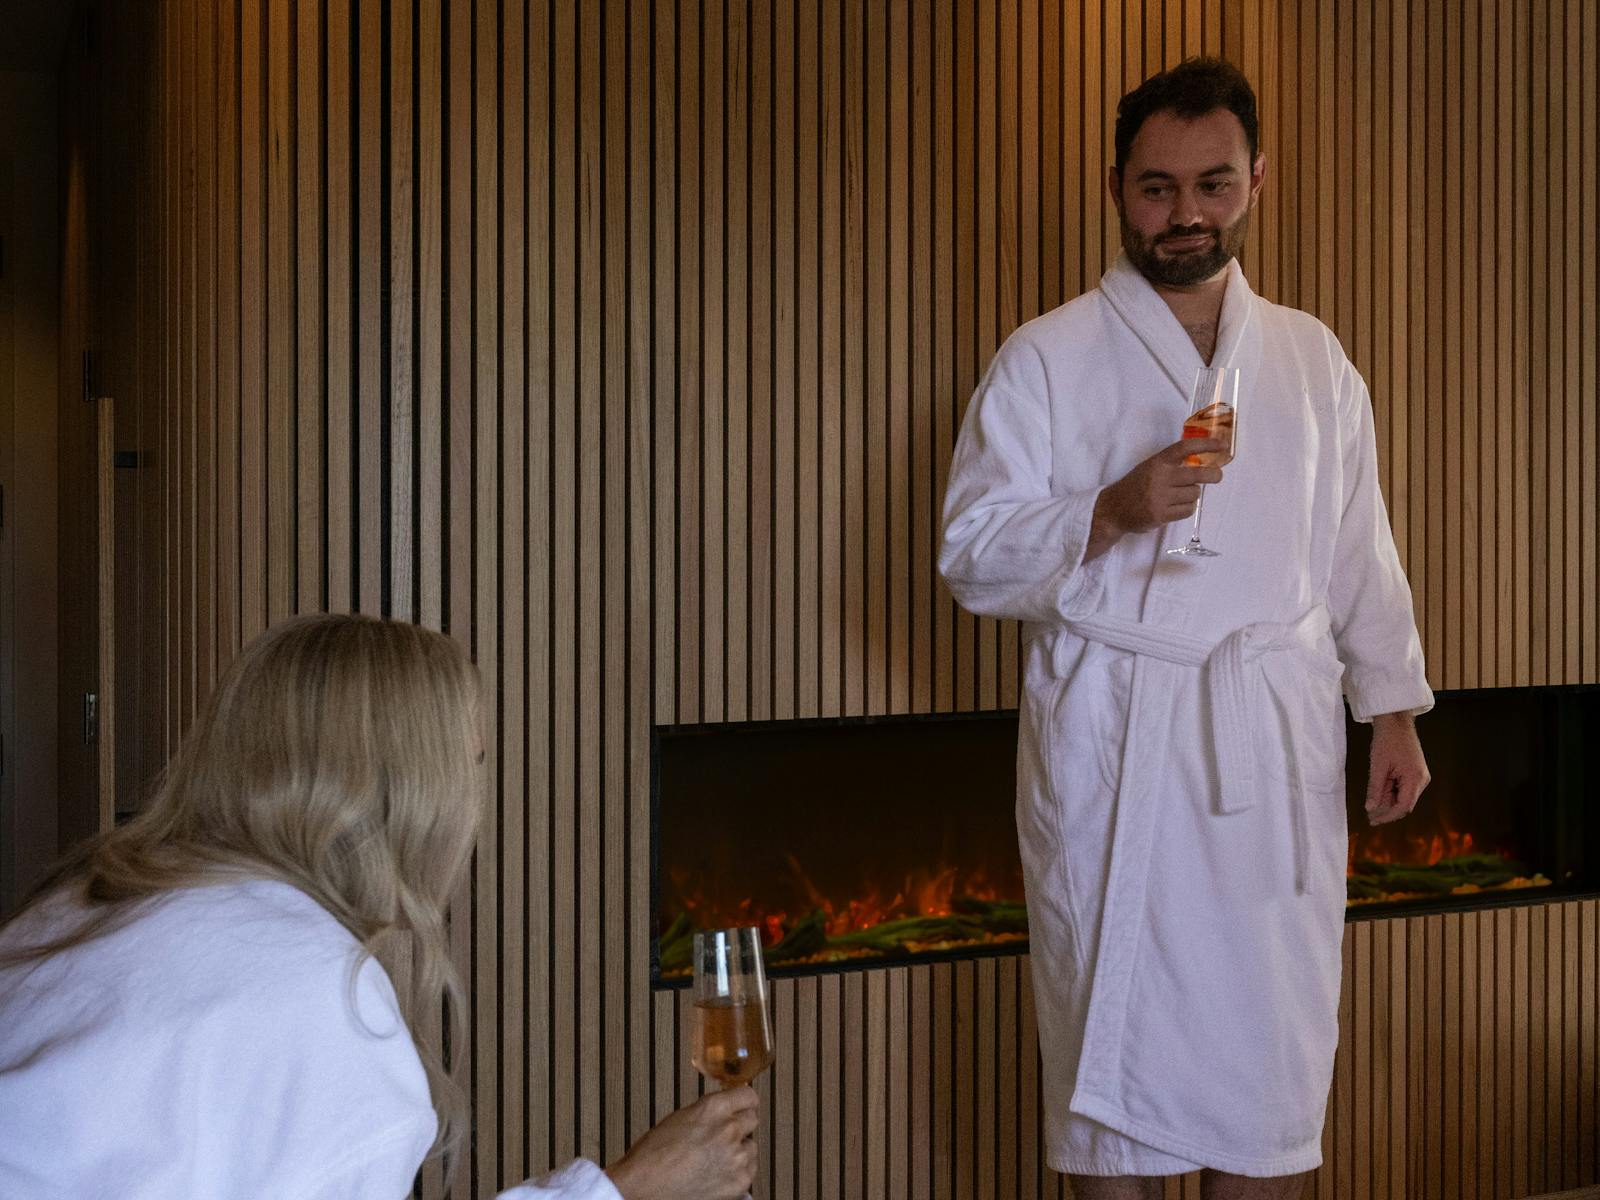 A man enjoying a glass of wine by the fireplace looking at a woman, they are wearing white robes